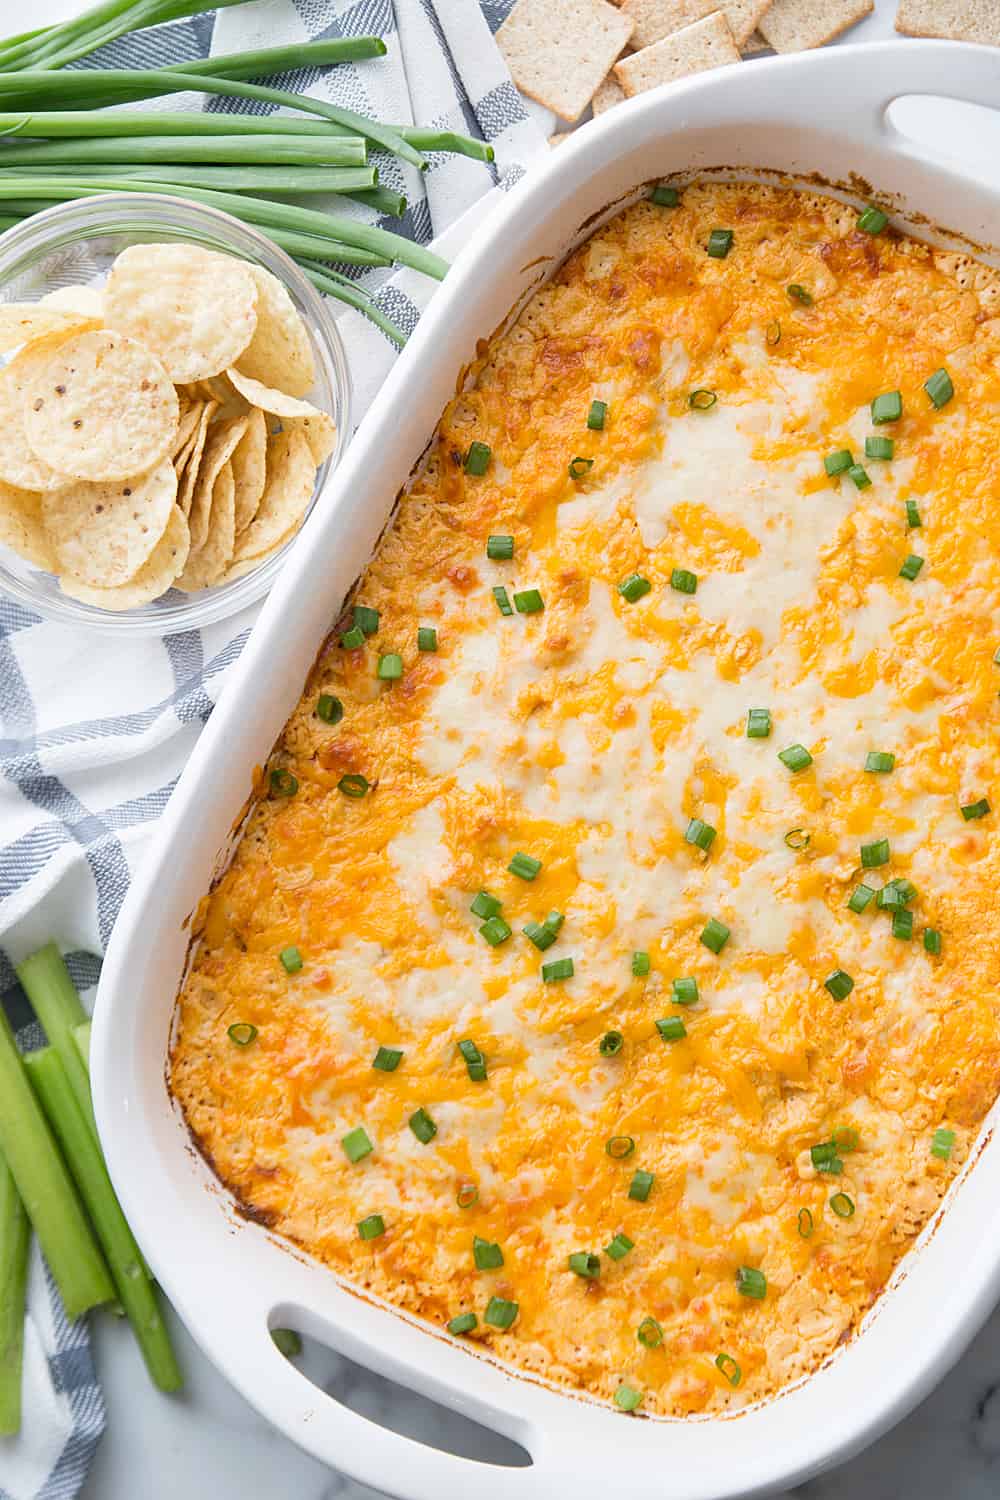 Best Buffalo Chicken Dip fresh from the oven.